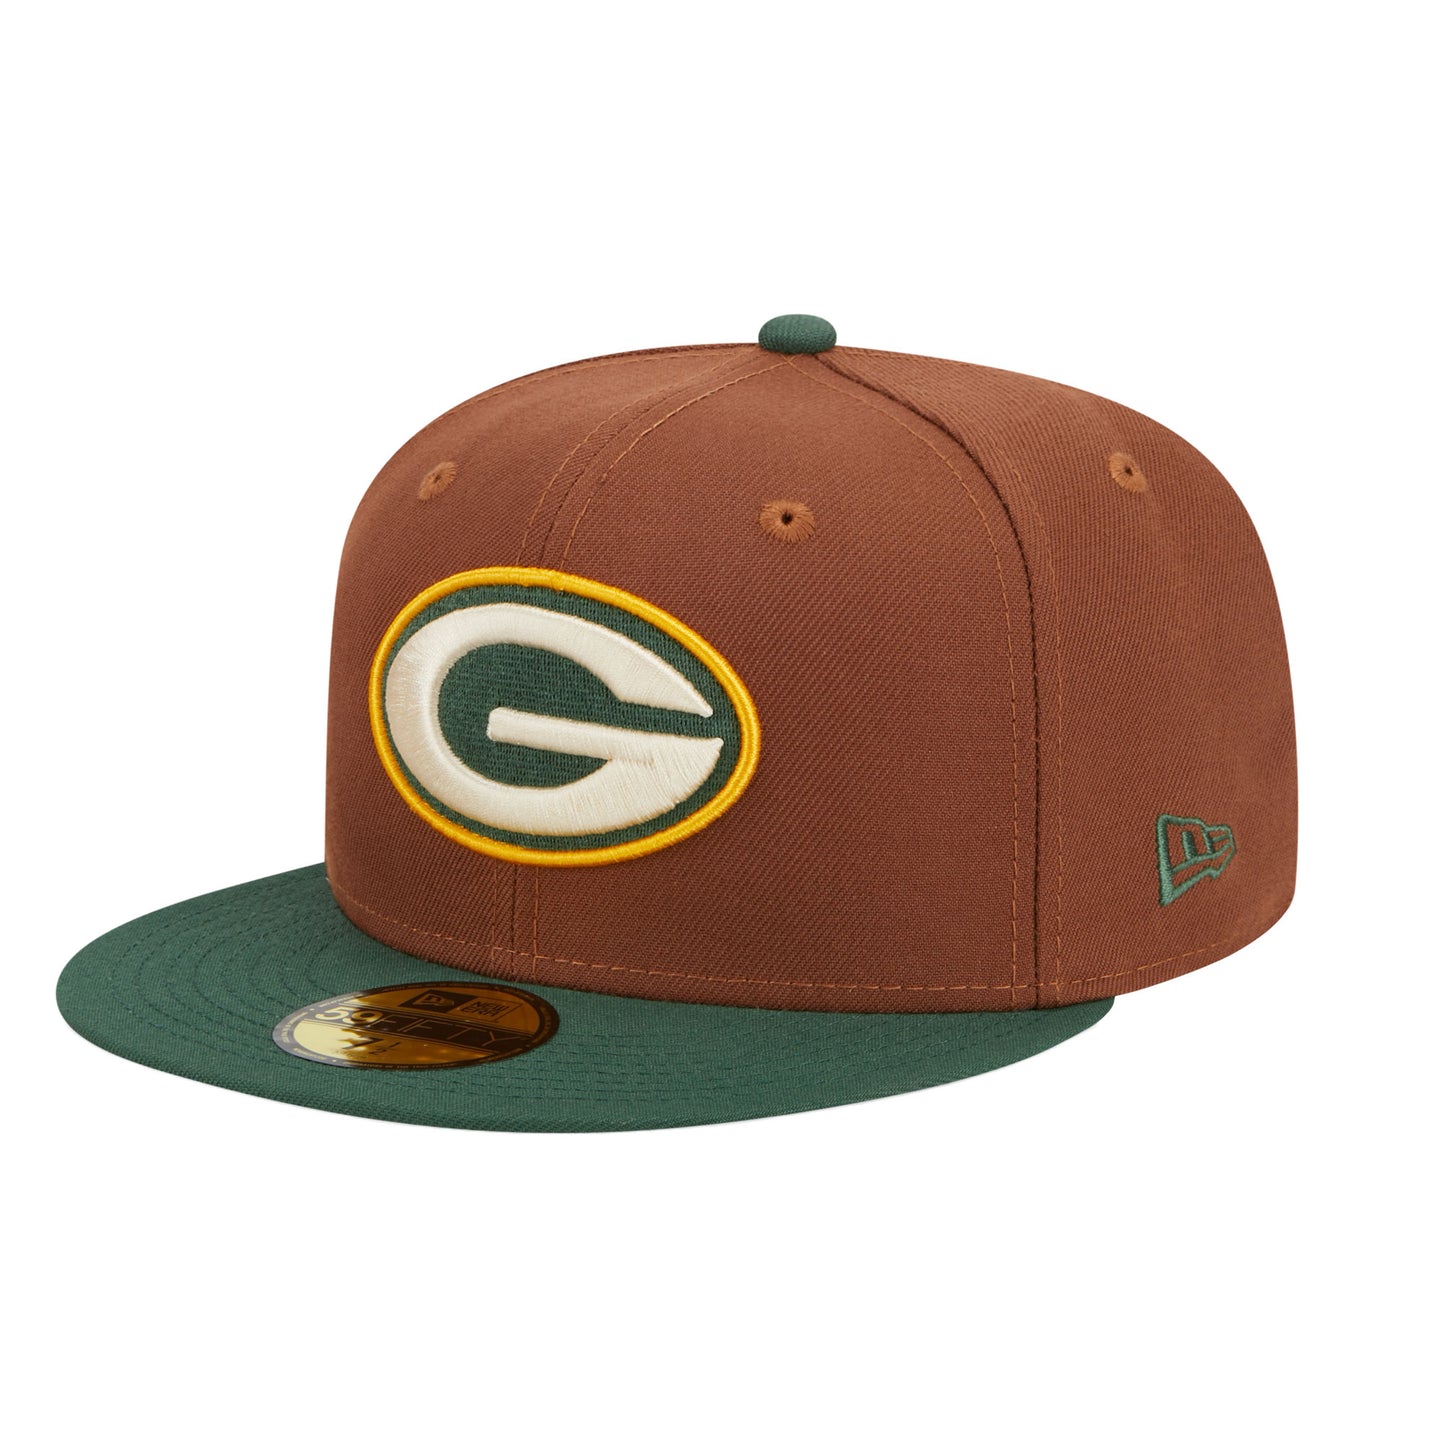 Green Bay Packers New Era 59FIFTY Cap Harvest Pack